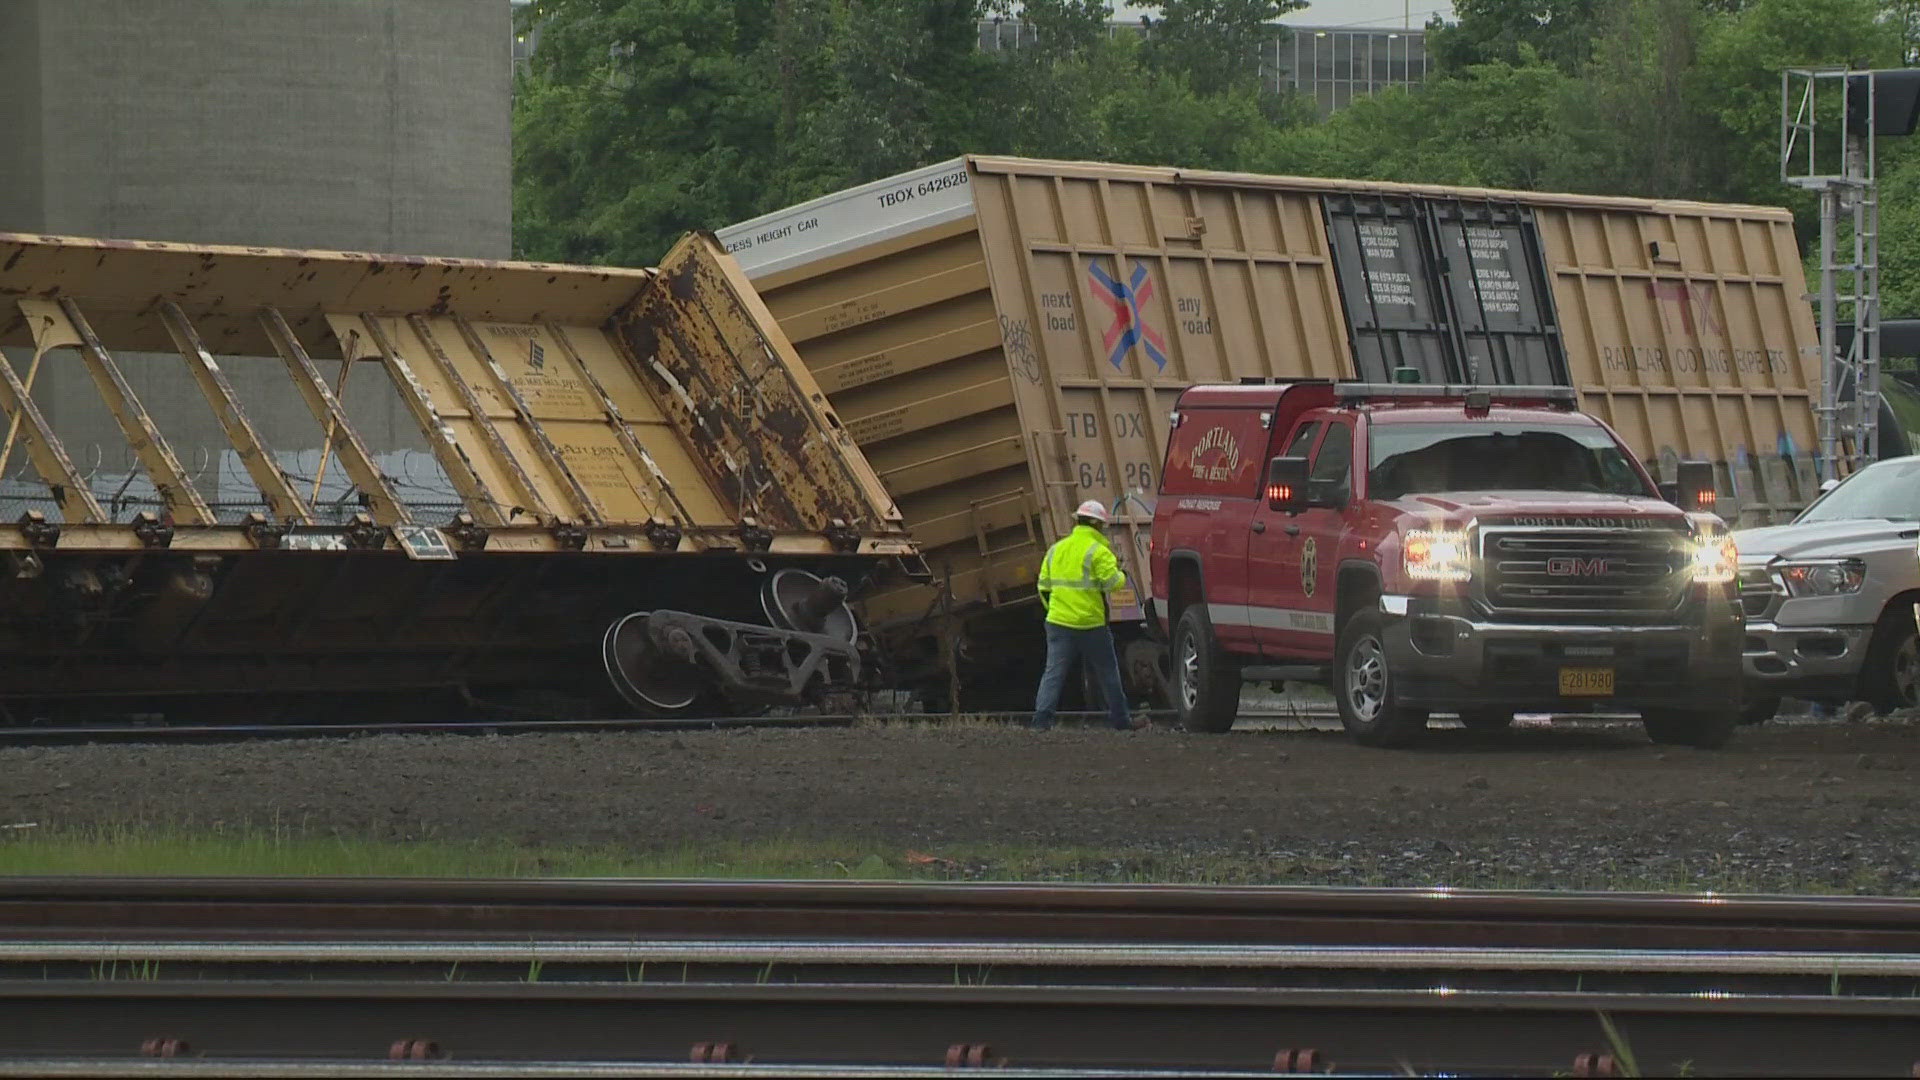 Five cars derailed near the east end of the Steel Bridge Monday morning, according to Union Pacific. The train cars are empty.